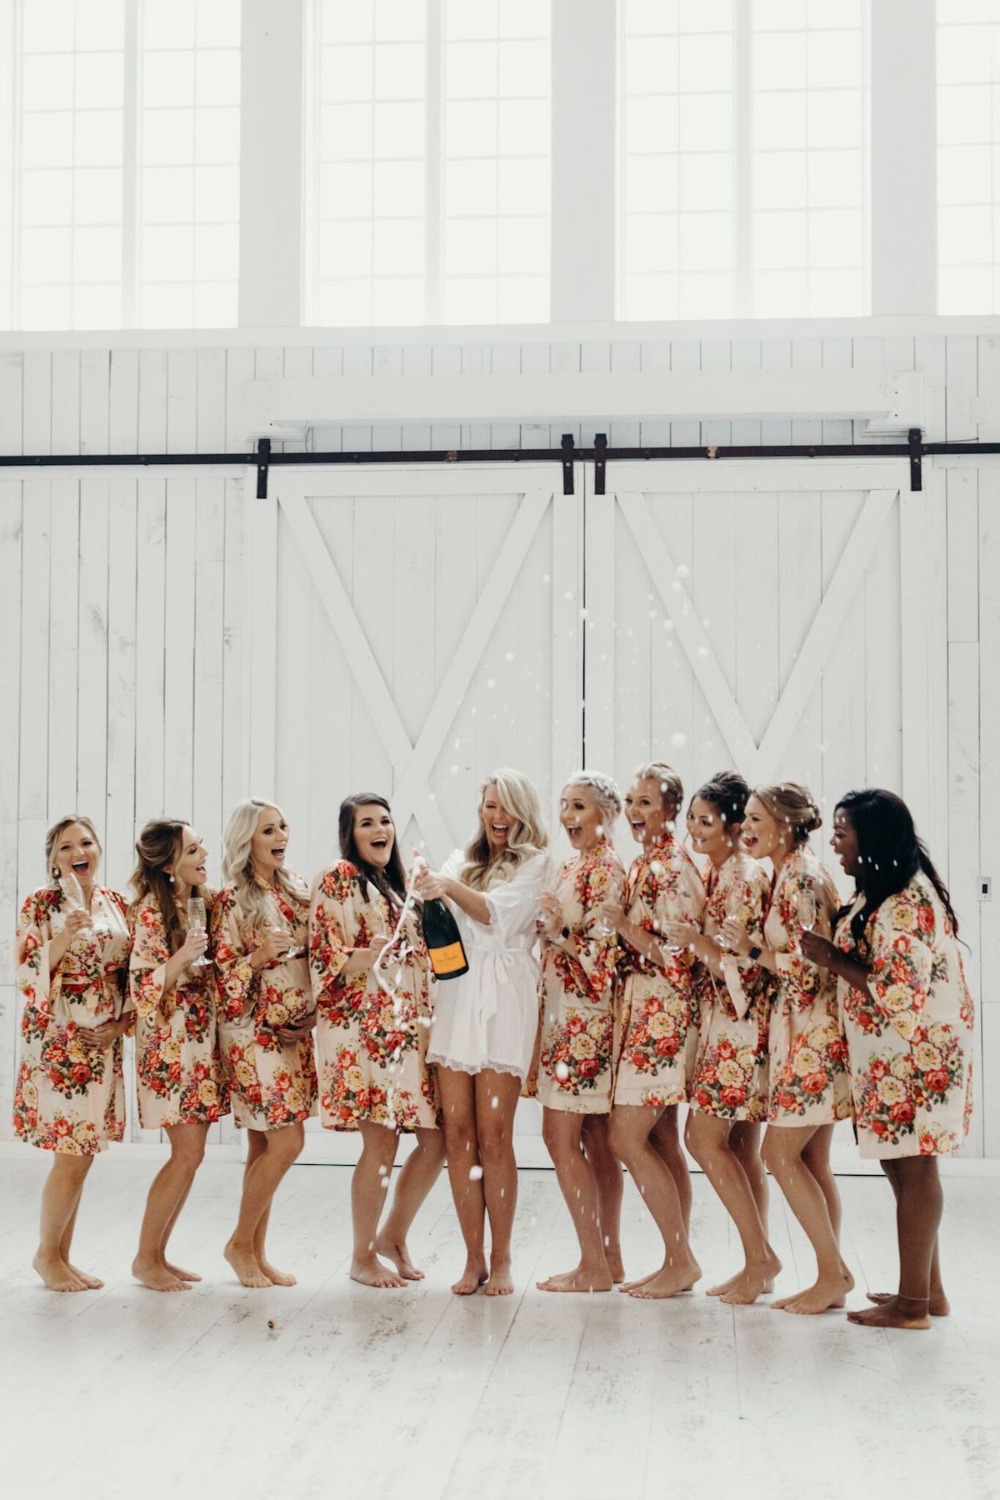 Champagne toast bridesmaids